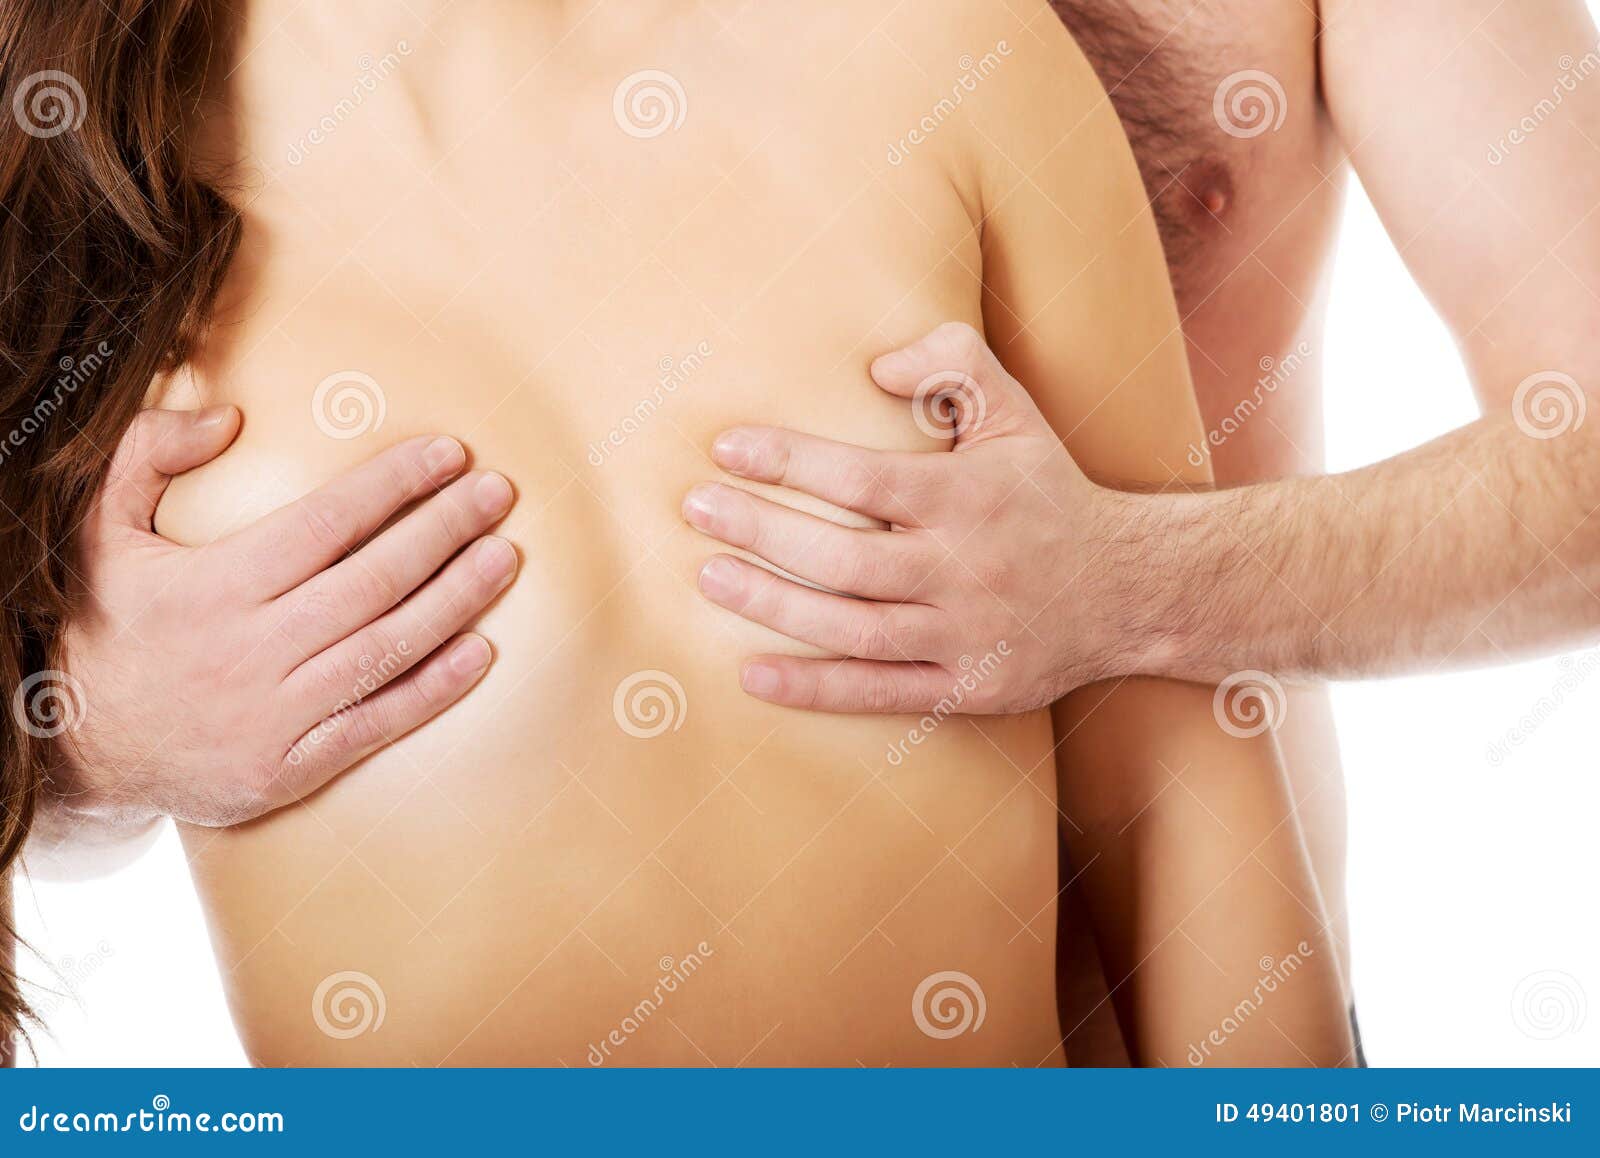 Man Touching Woman S Breast. Stock Image - Image of seductive, female:  49401801